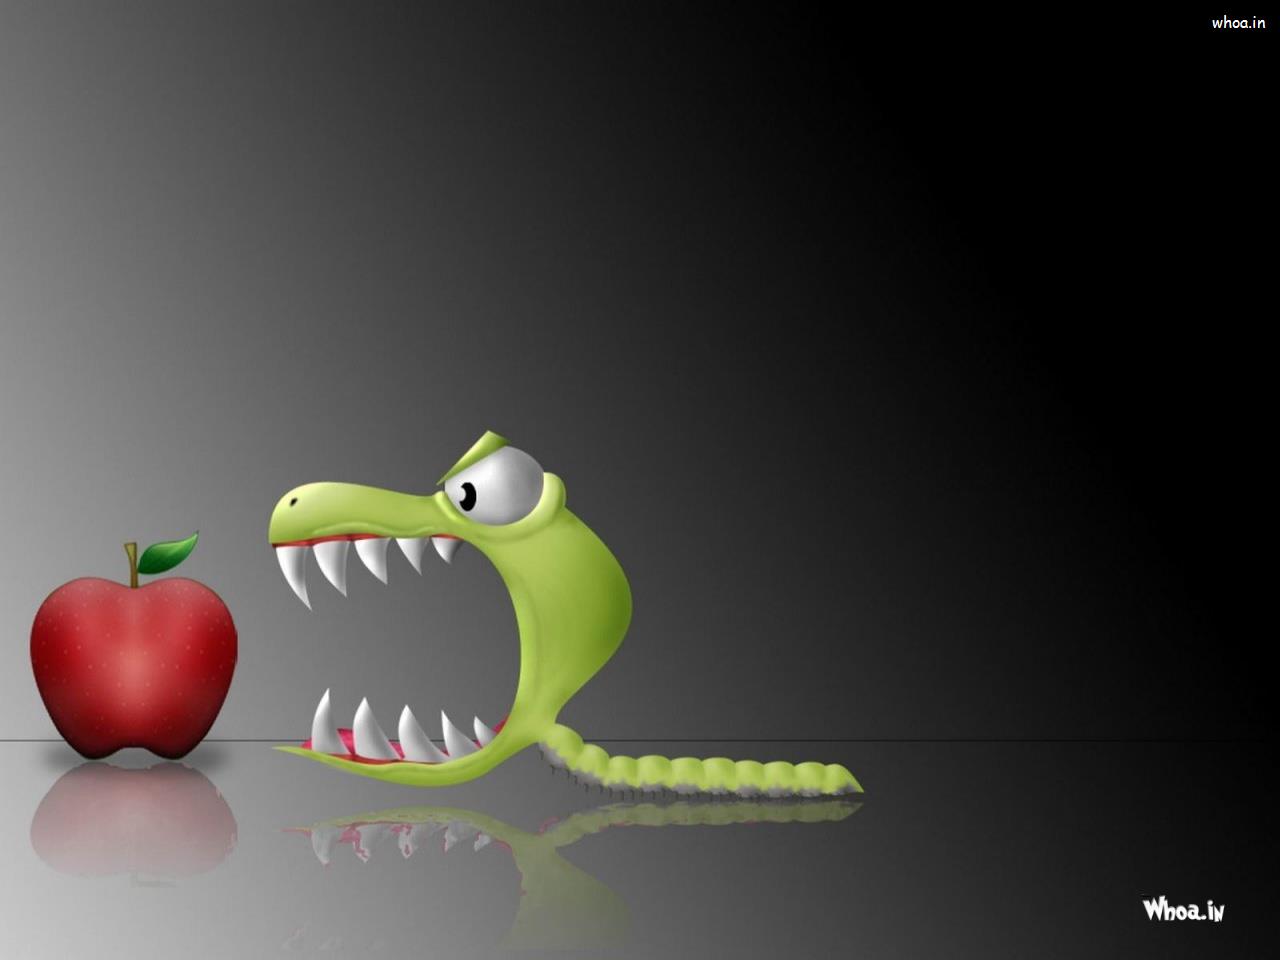 Green Bug Eat Red Apple Lunch Time HD Cartoon Funny Wallpaper